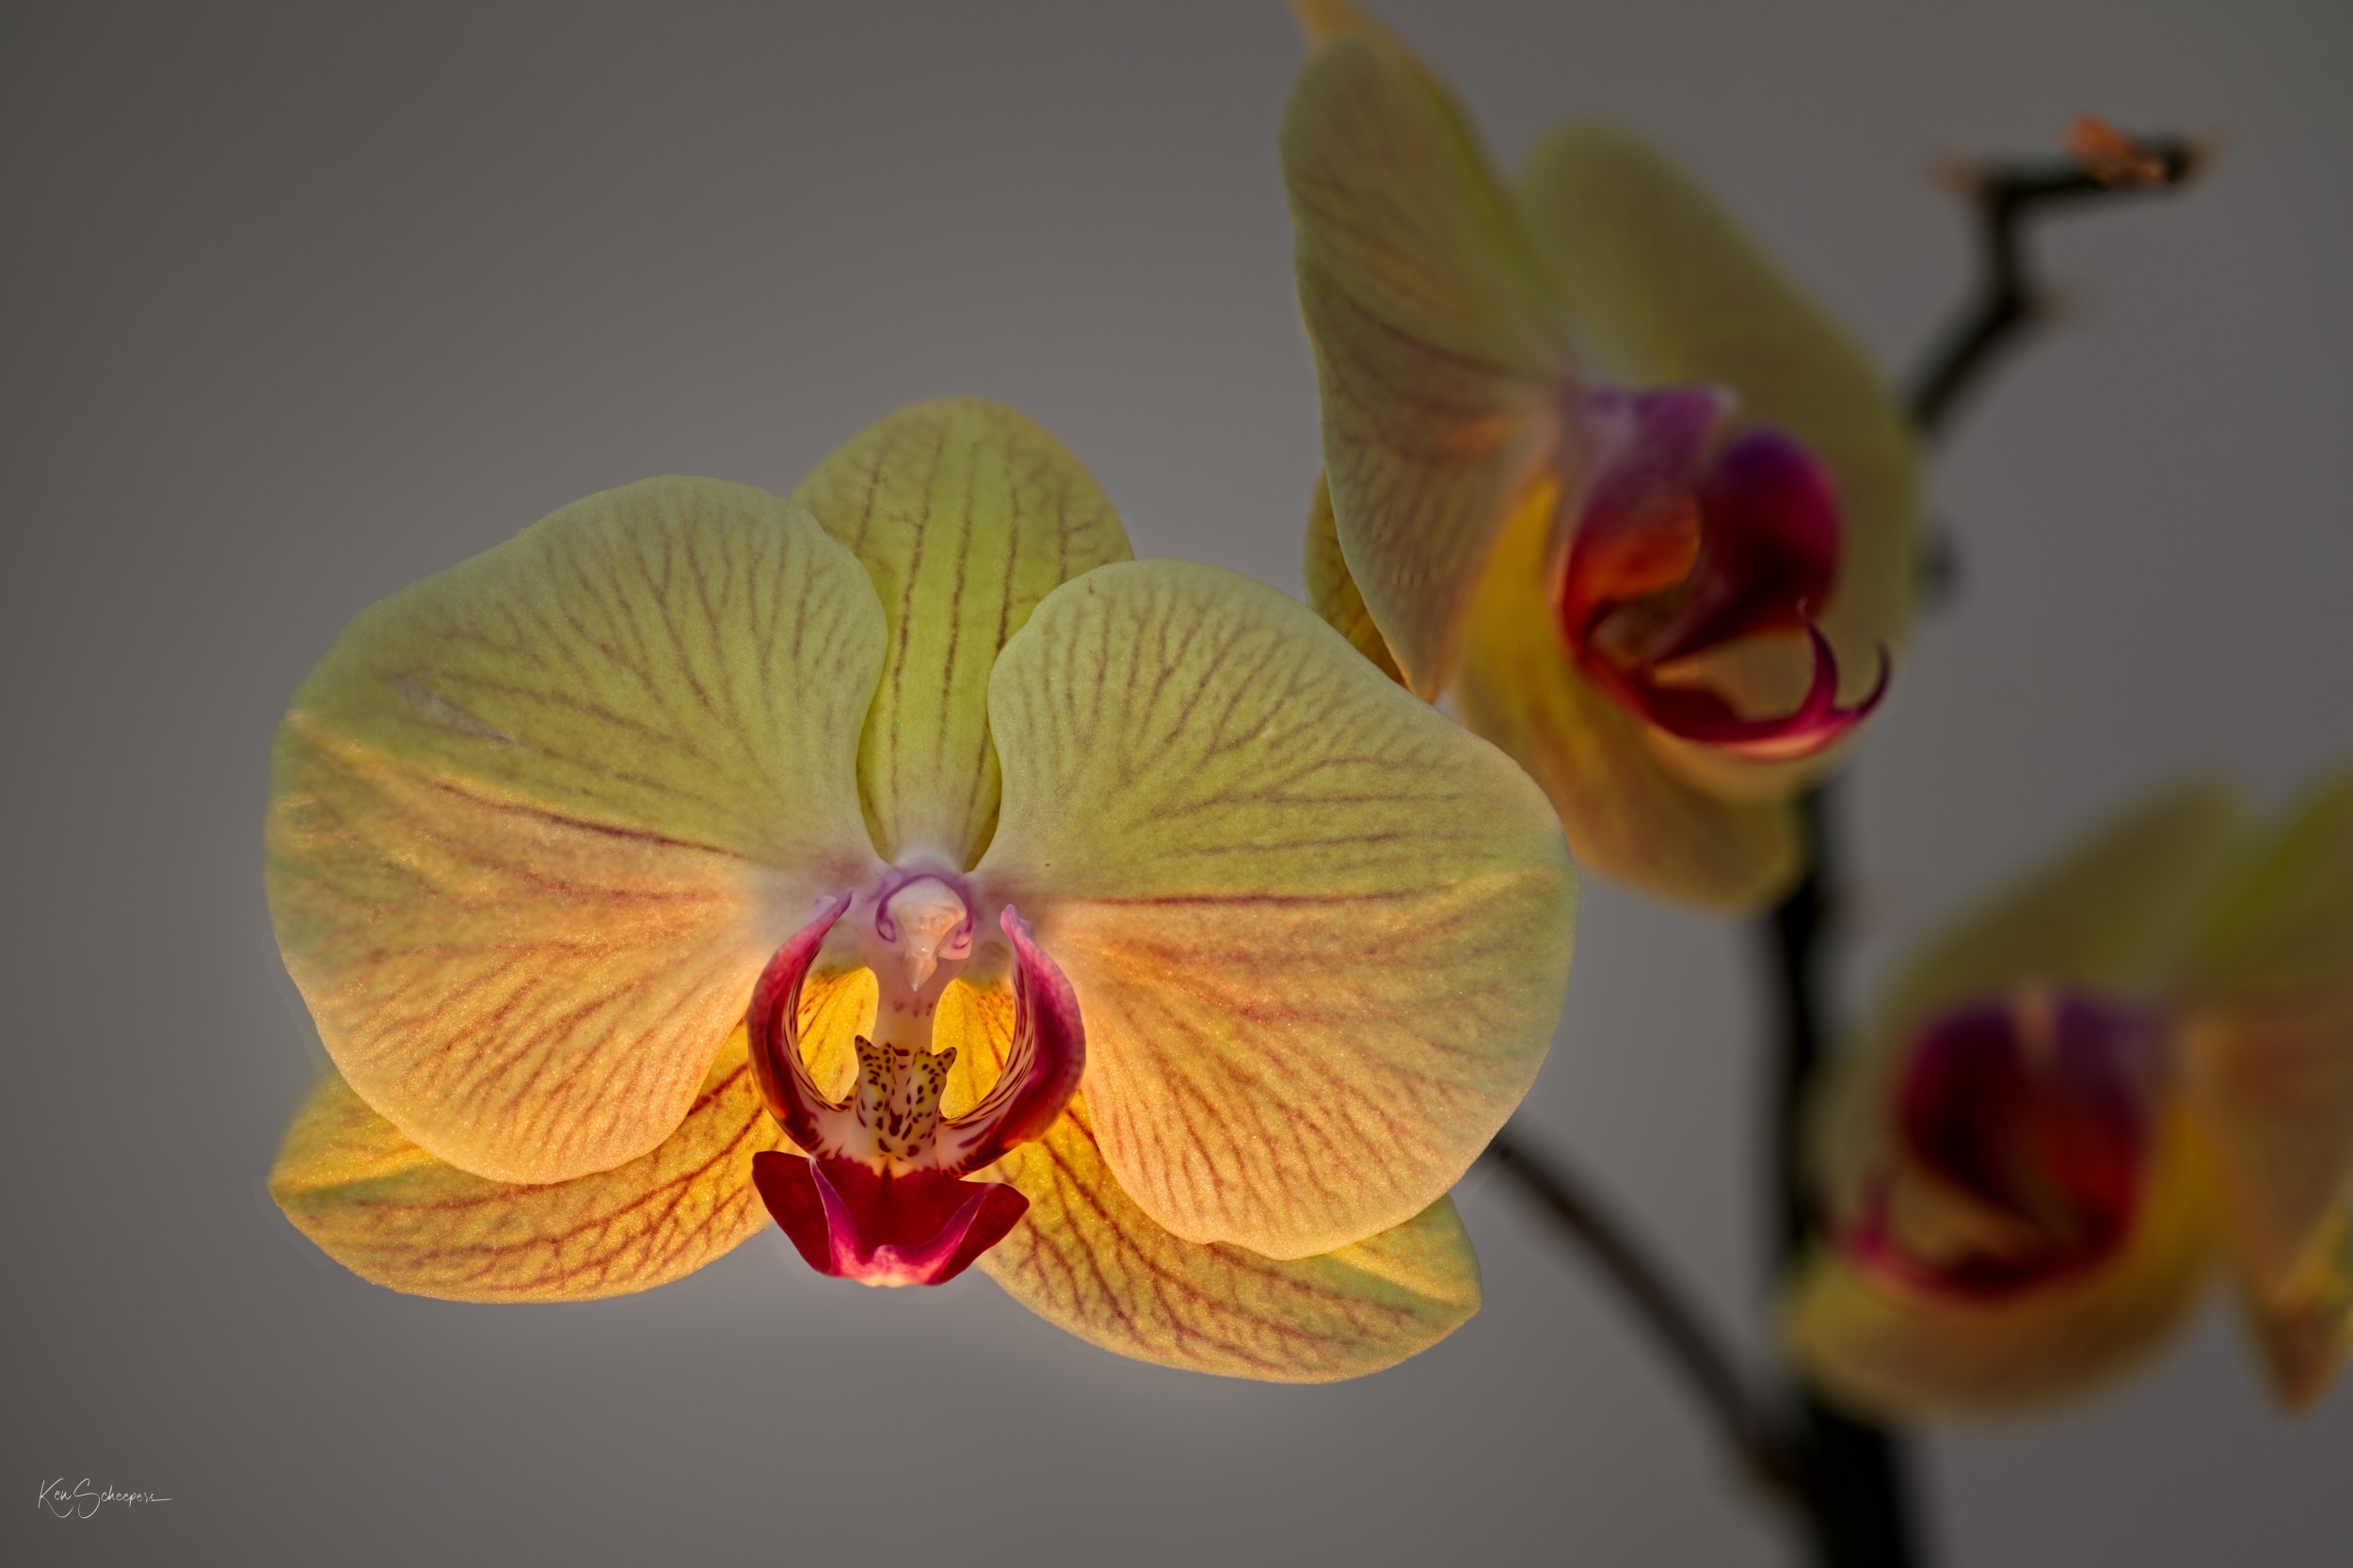 Focus-stacked Orchid